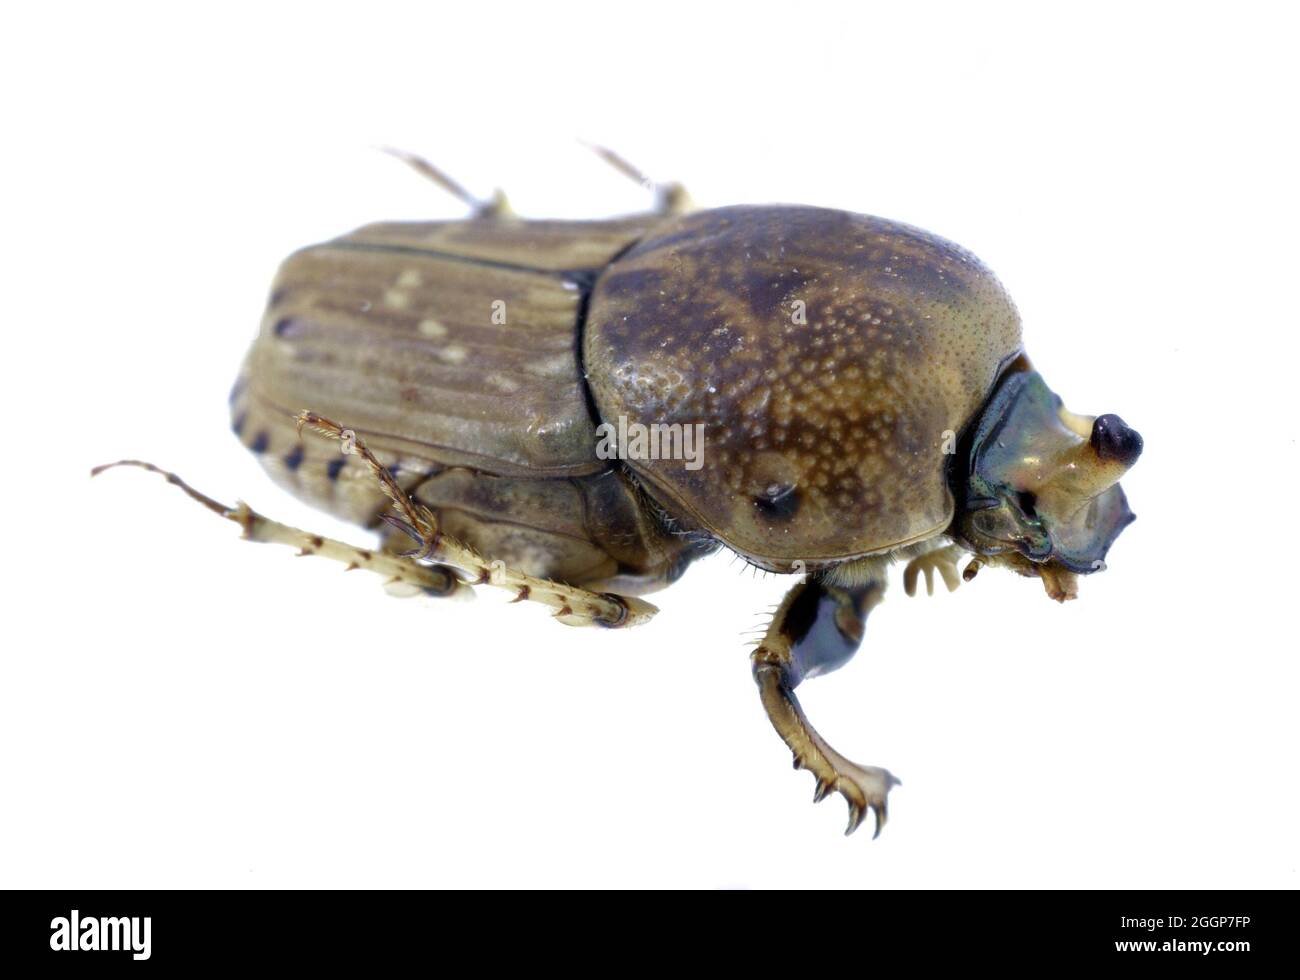 Northern Sandy Dung Beetle (Euoniticellus intermedius). Stock Photo